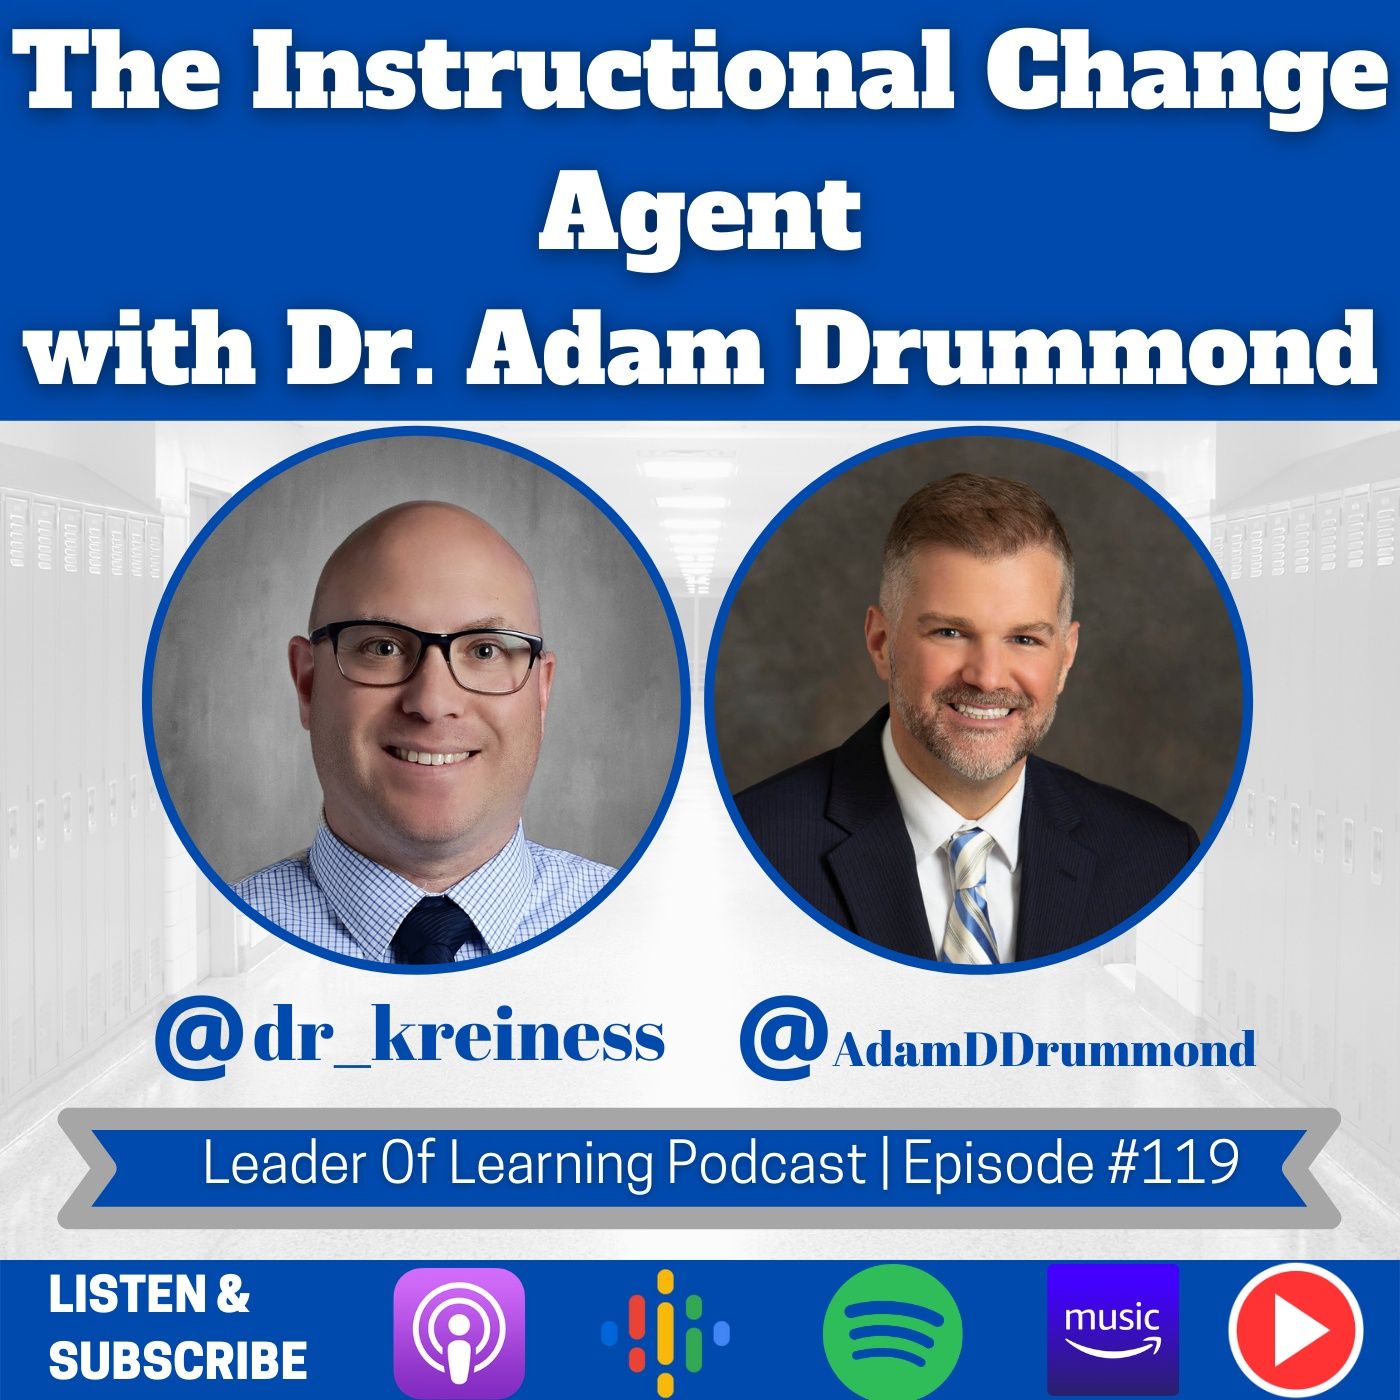 The Instructional Change Agent with Dr. Adam Drummond Image